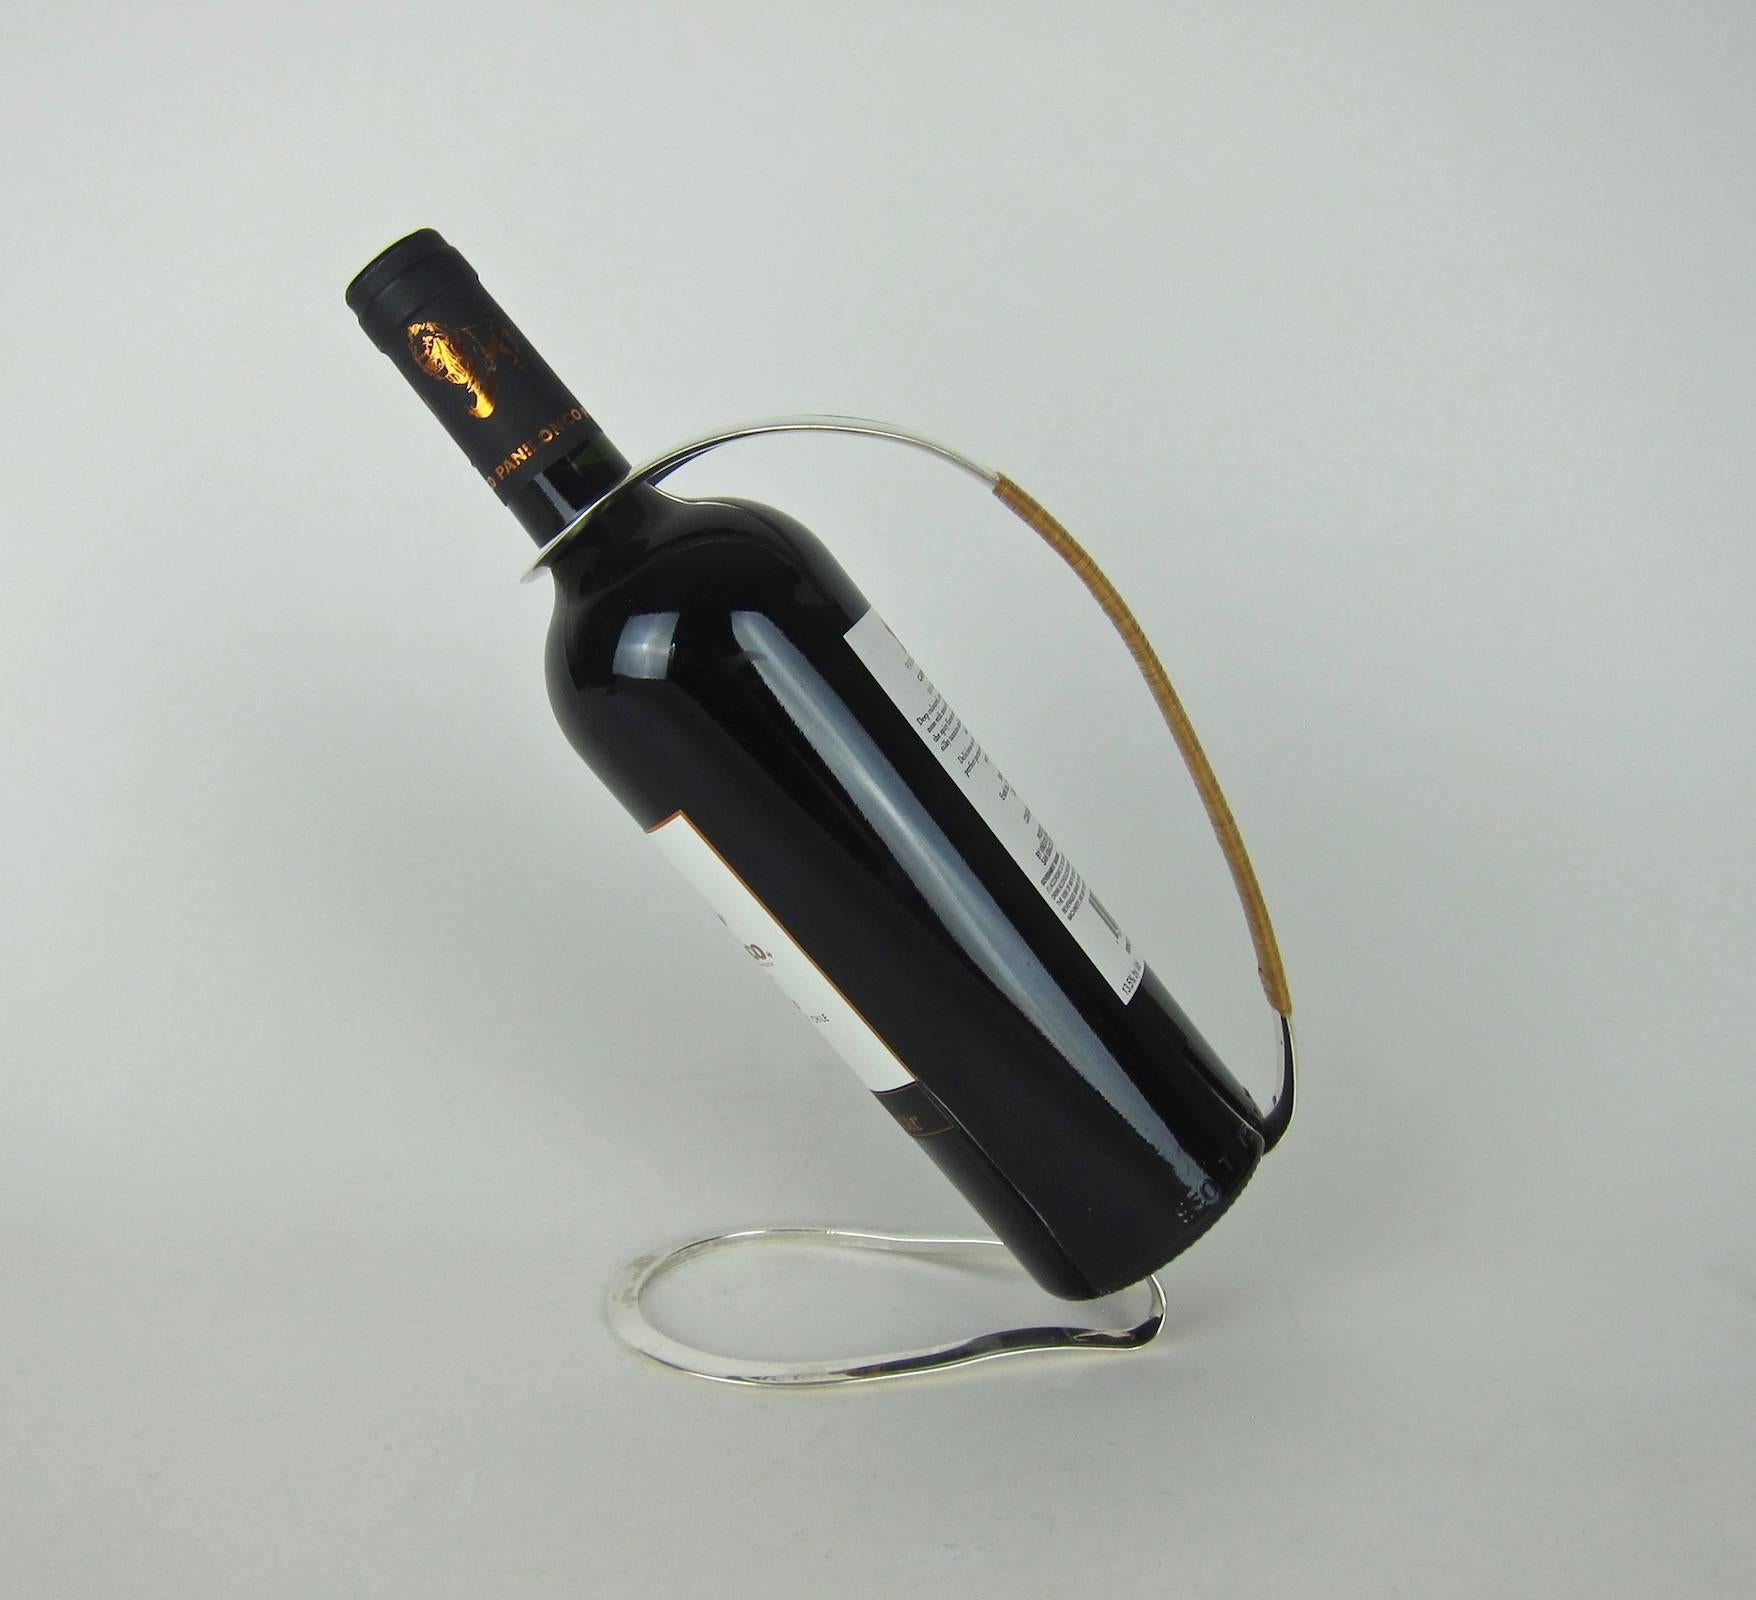 A Mid-century German wine bottle holder in silver plate with a cane wrapped handle. Stamped with the "EL" and crown Eisenberg-Lozano, Inc. of New York trademark. The holder is in good condition, measuring 9 in. H x 3.75 in. W.

Arthur